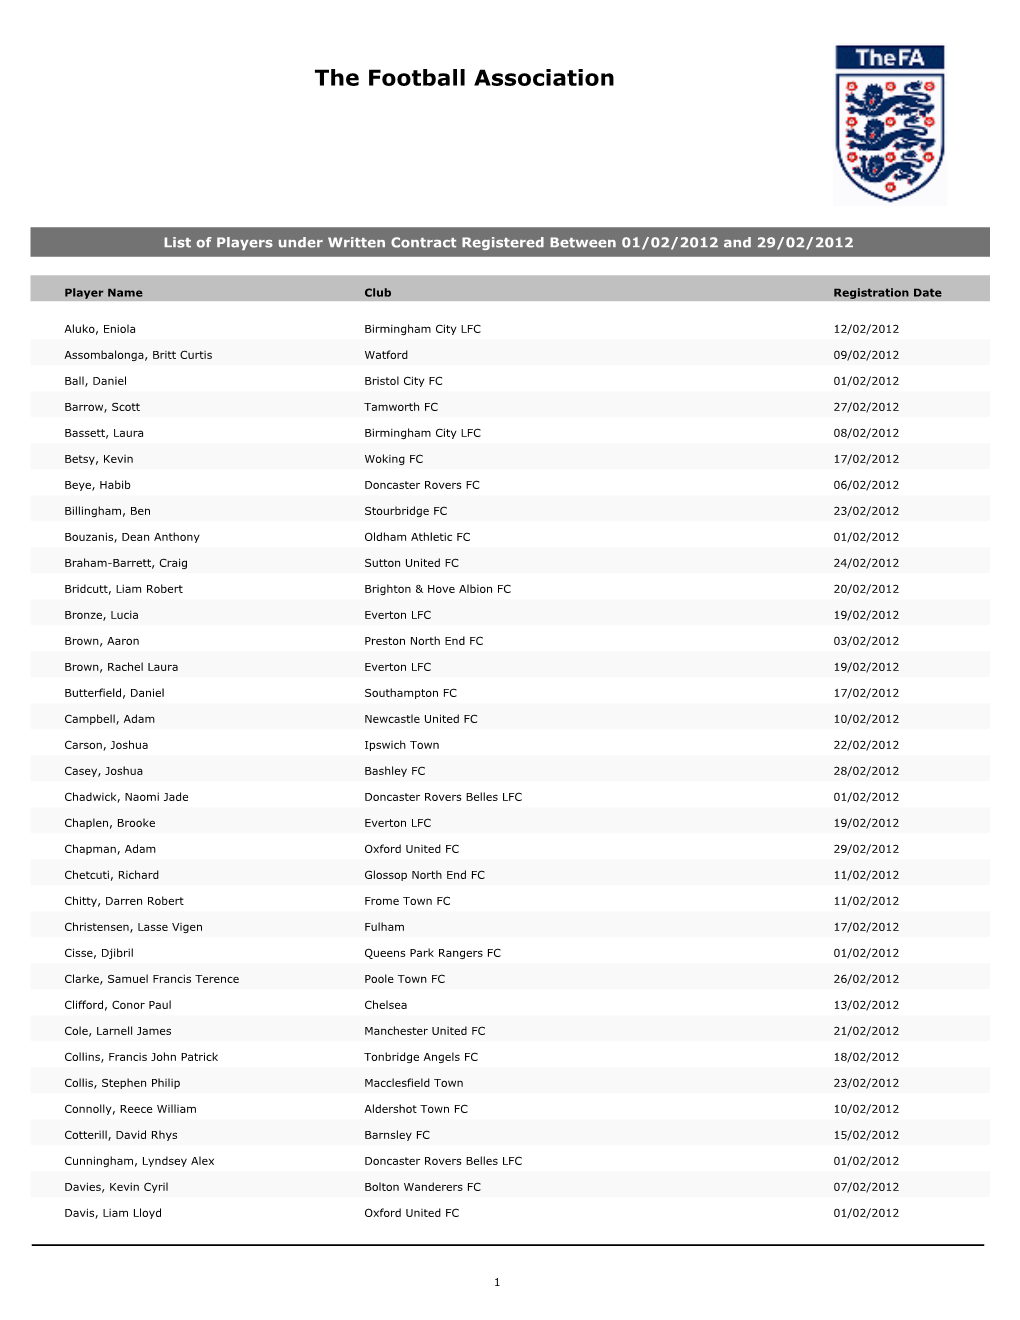 List of Temporary Transfers of Players Under Written Contract Between 01/02/2012 and 29/02/2012